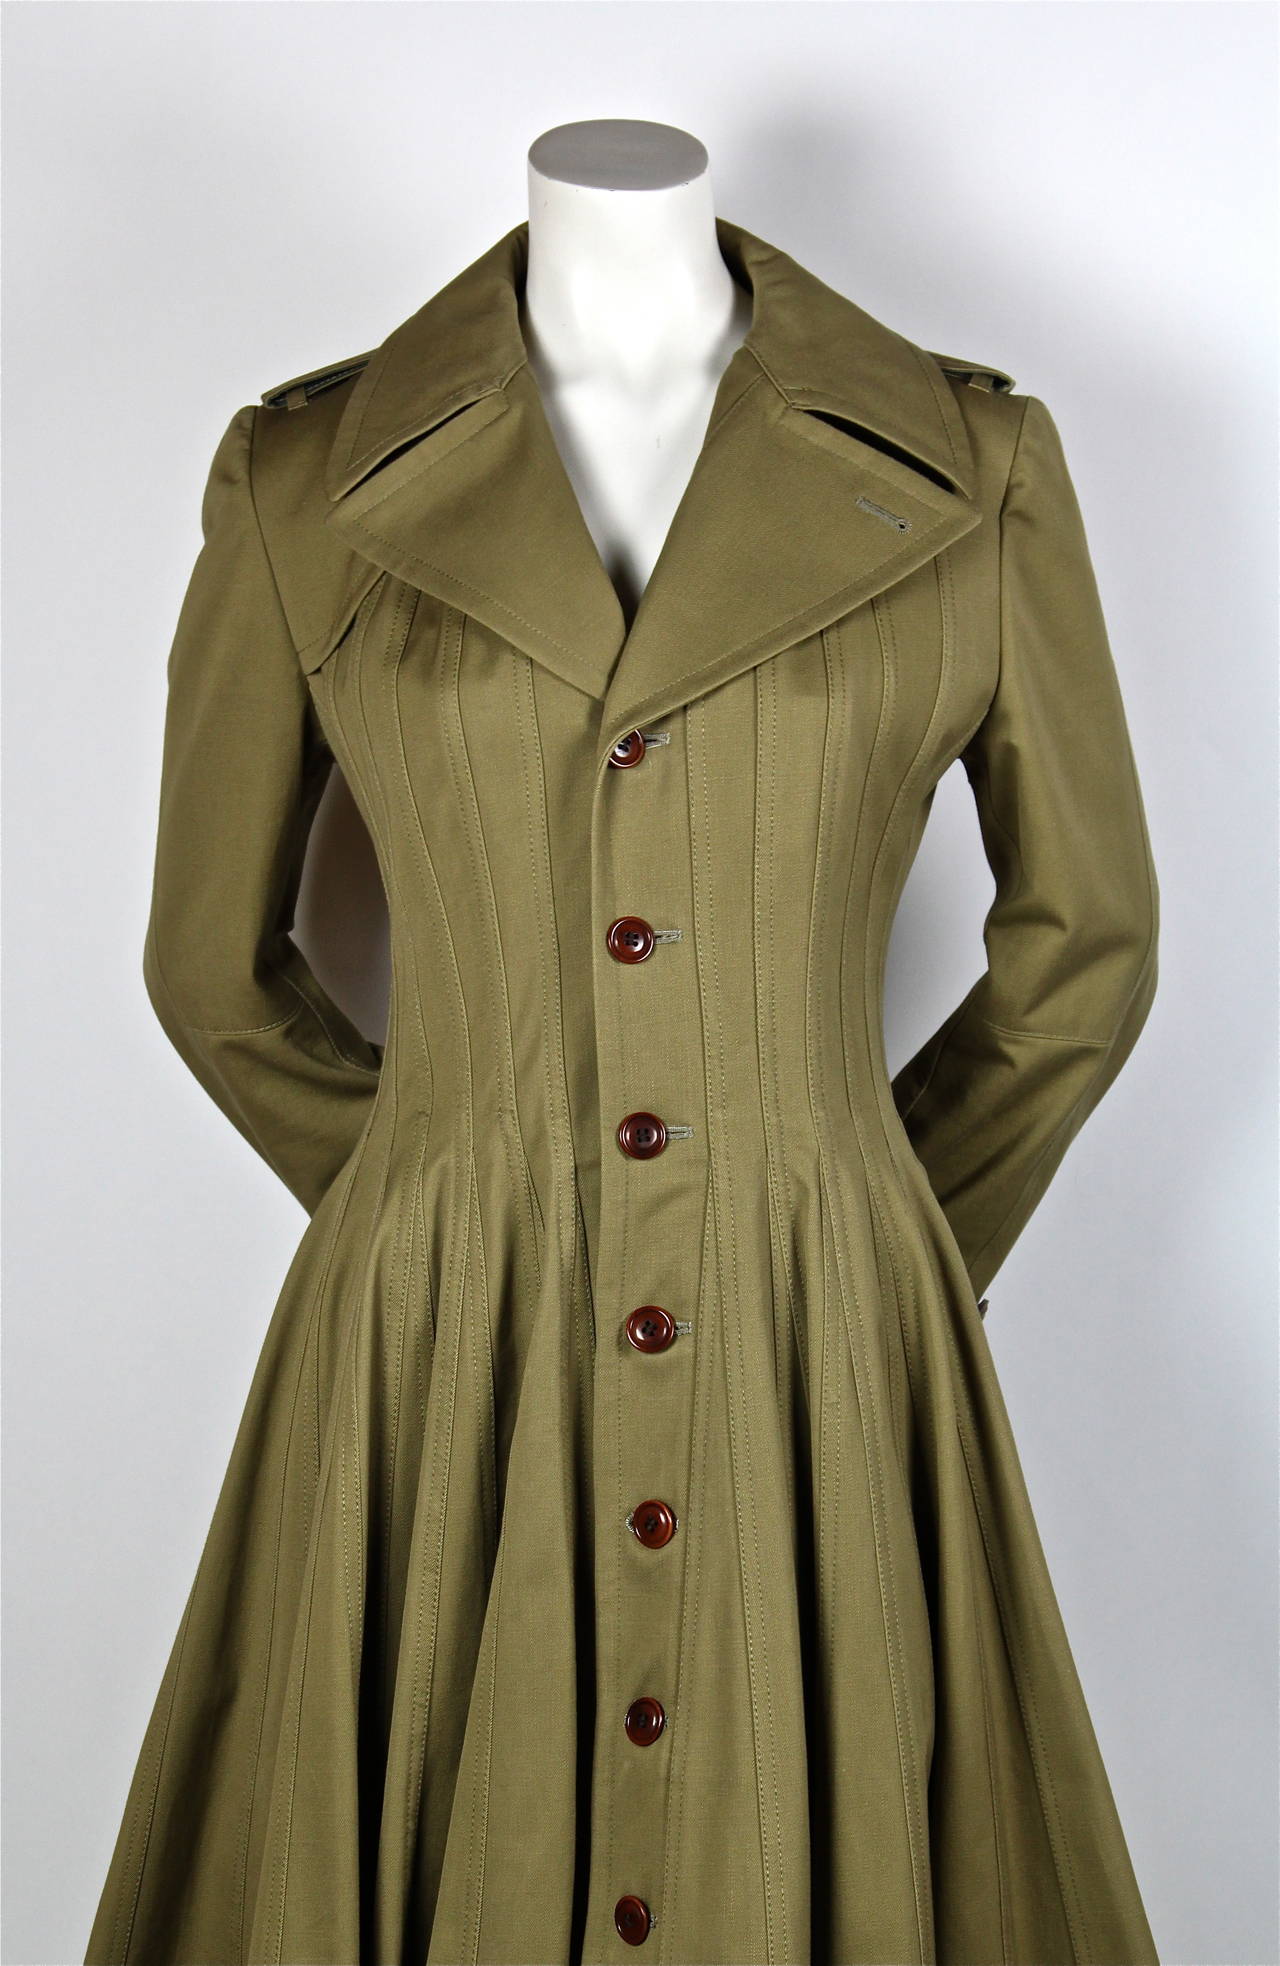 Khaki seamed 'Victorian' cut trench coat from Junya Watanabe for Comme Des Garcons exactly as seen on the runway for fall of 2010. Cotton gaberdine. Size M. Approximate measurements: shoulder 16